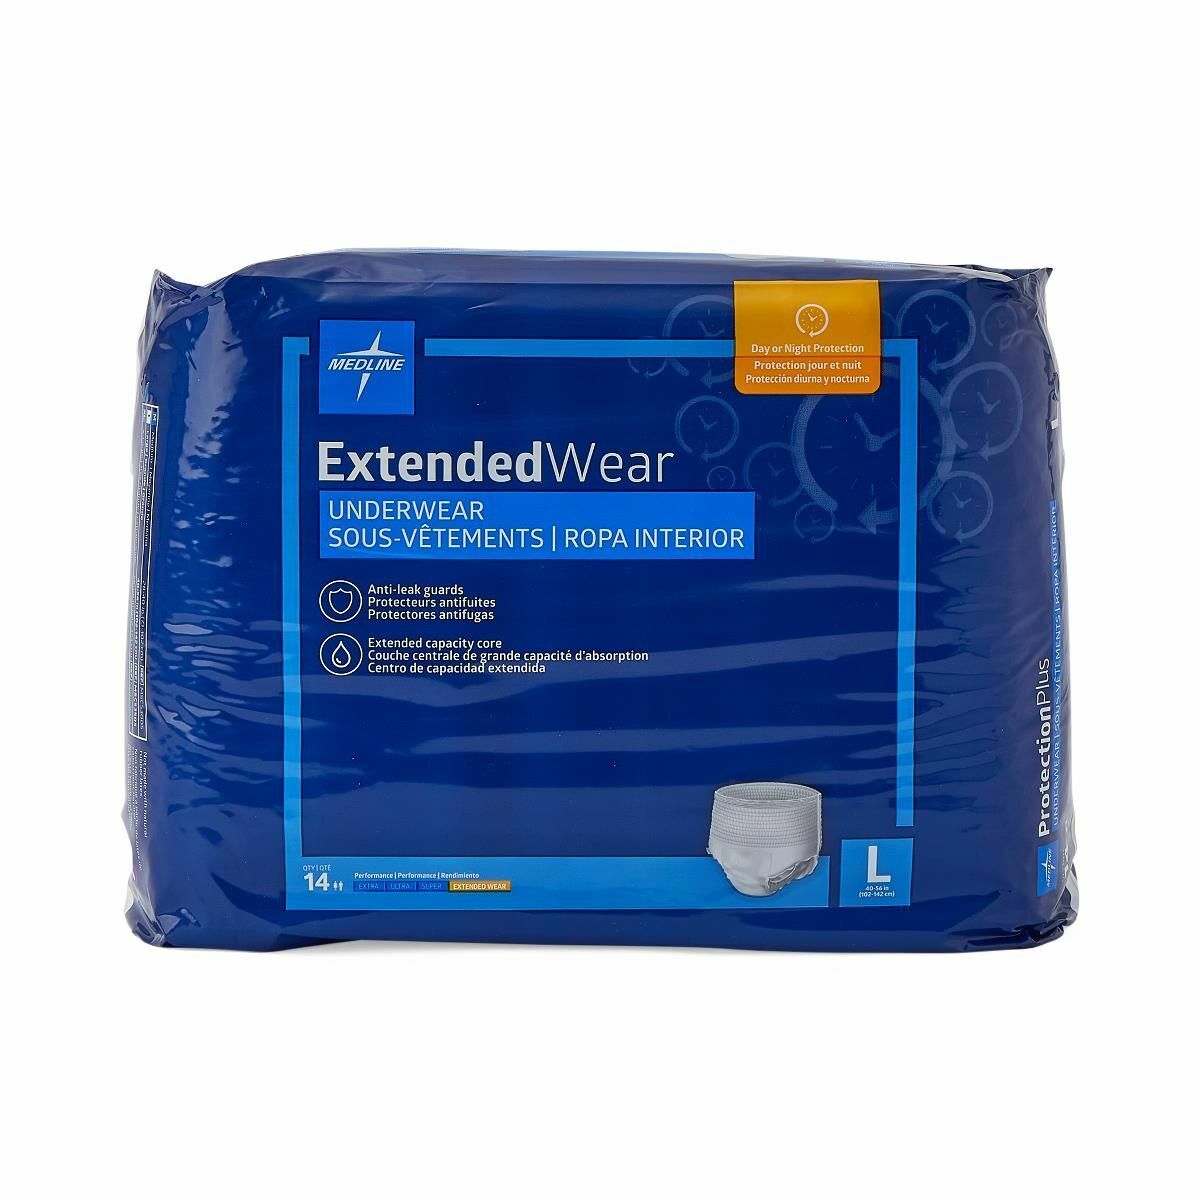 Medline Extended Wear Overnight Unisex Incontinence Underwear Diapers M/L/XL